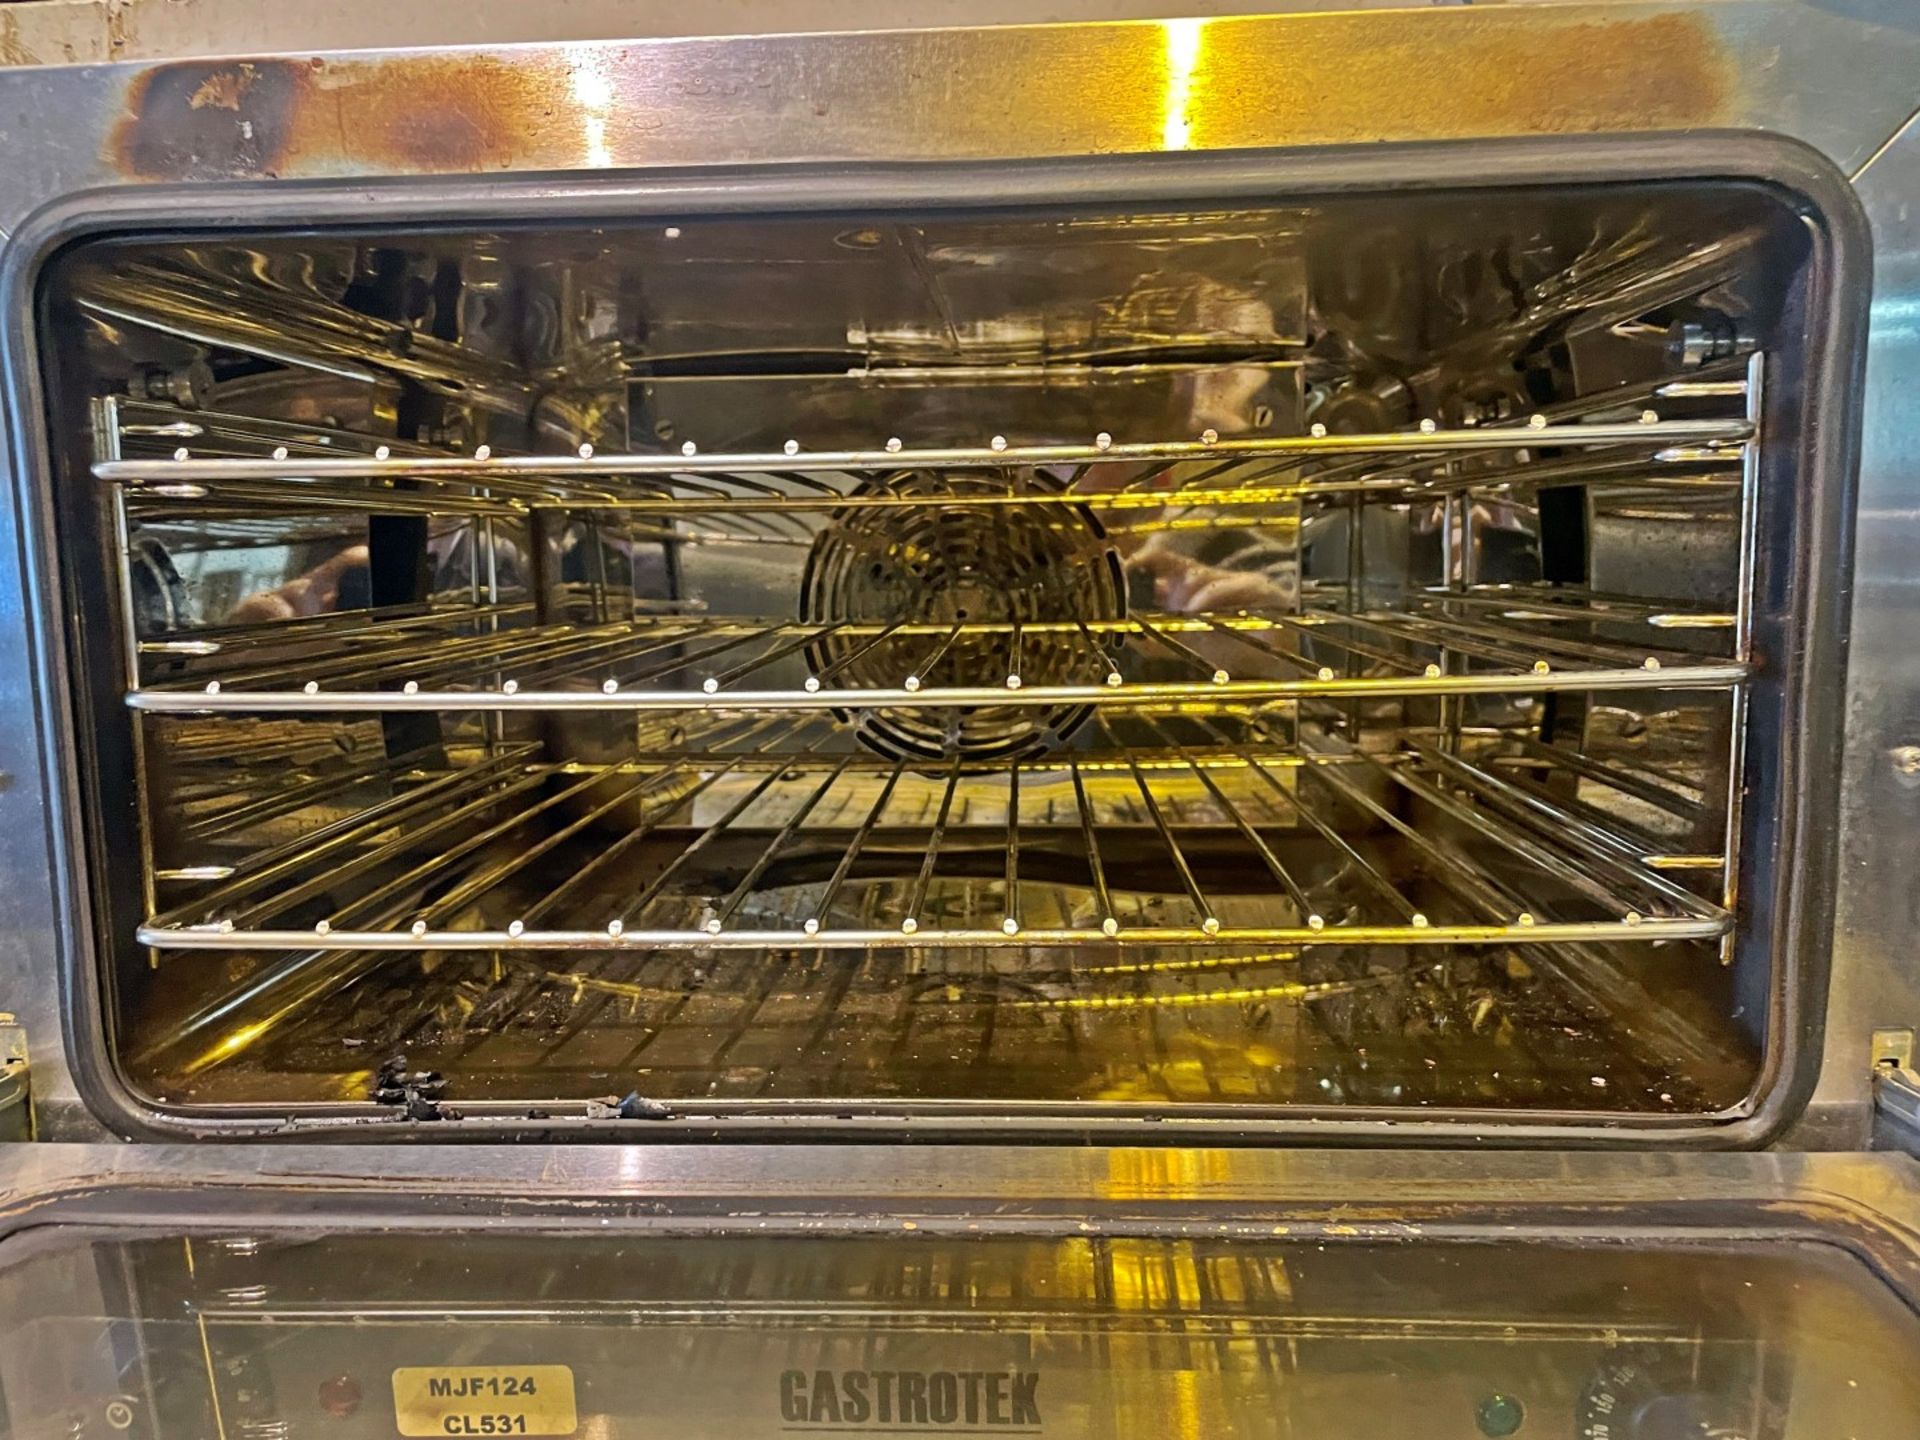 1 x Gastrotek Countertop Commercial Oven With a Stainless Steel Finish - Image 3 of 6